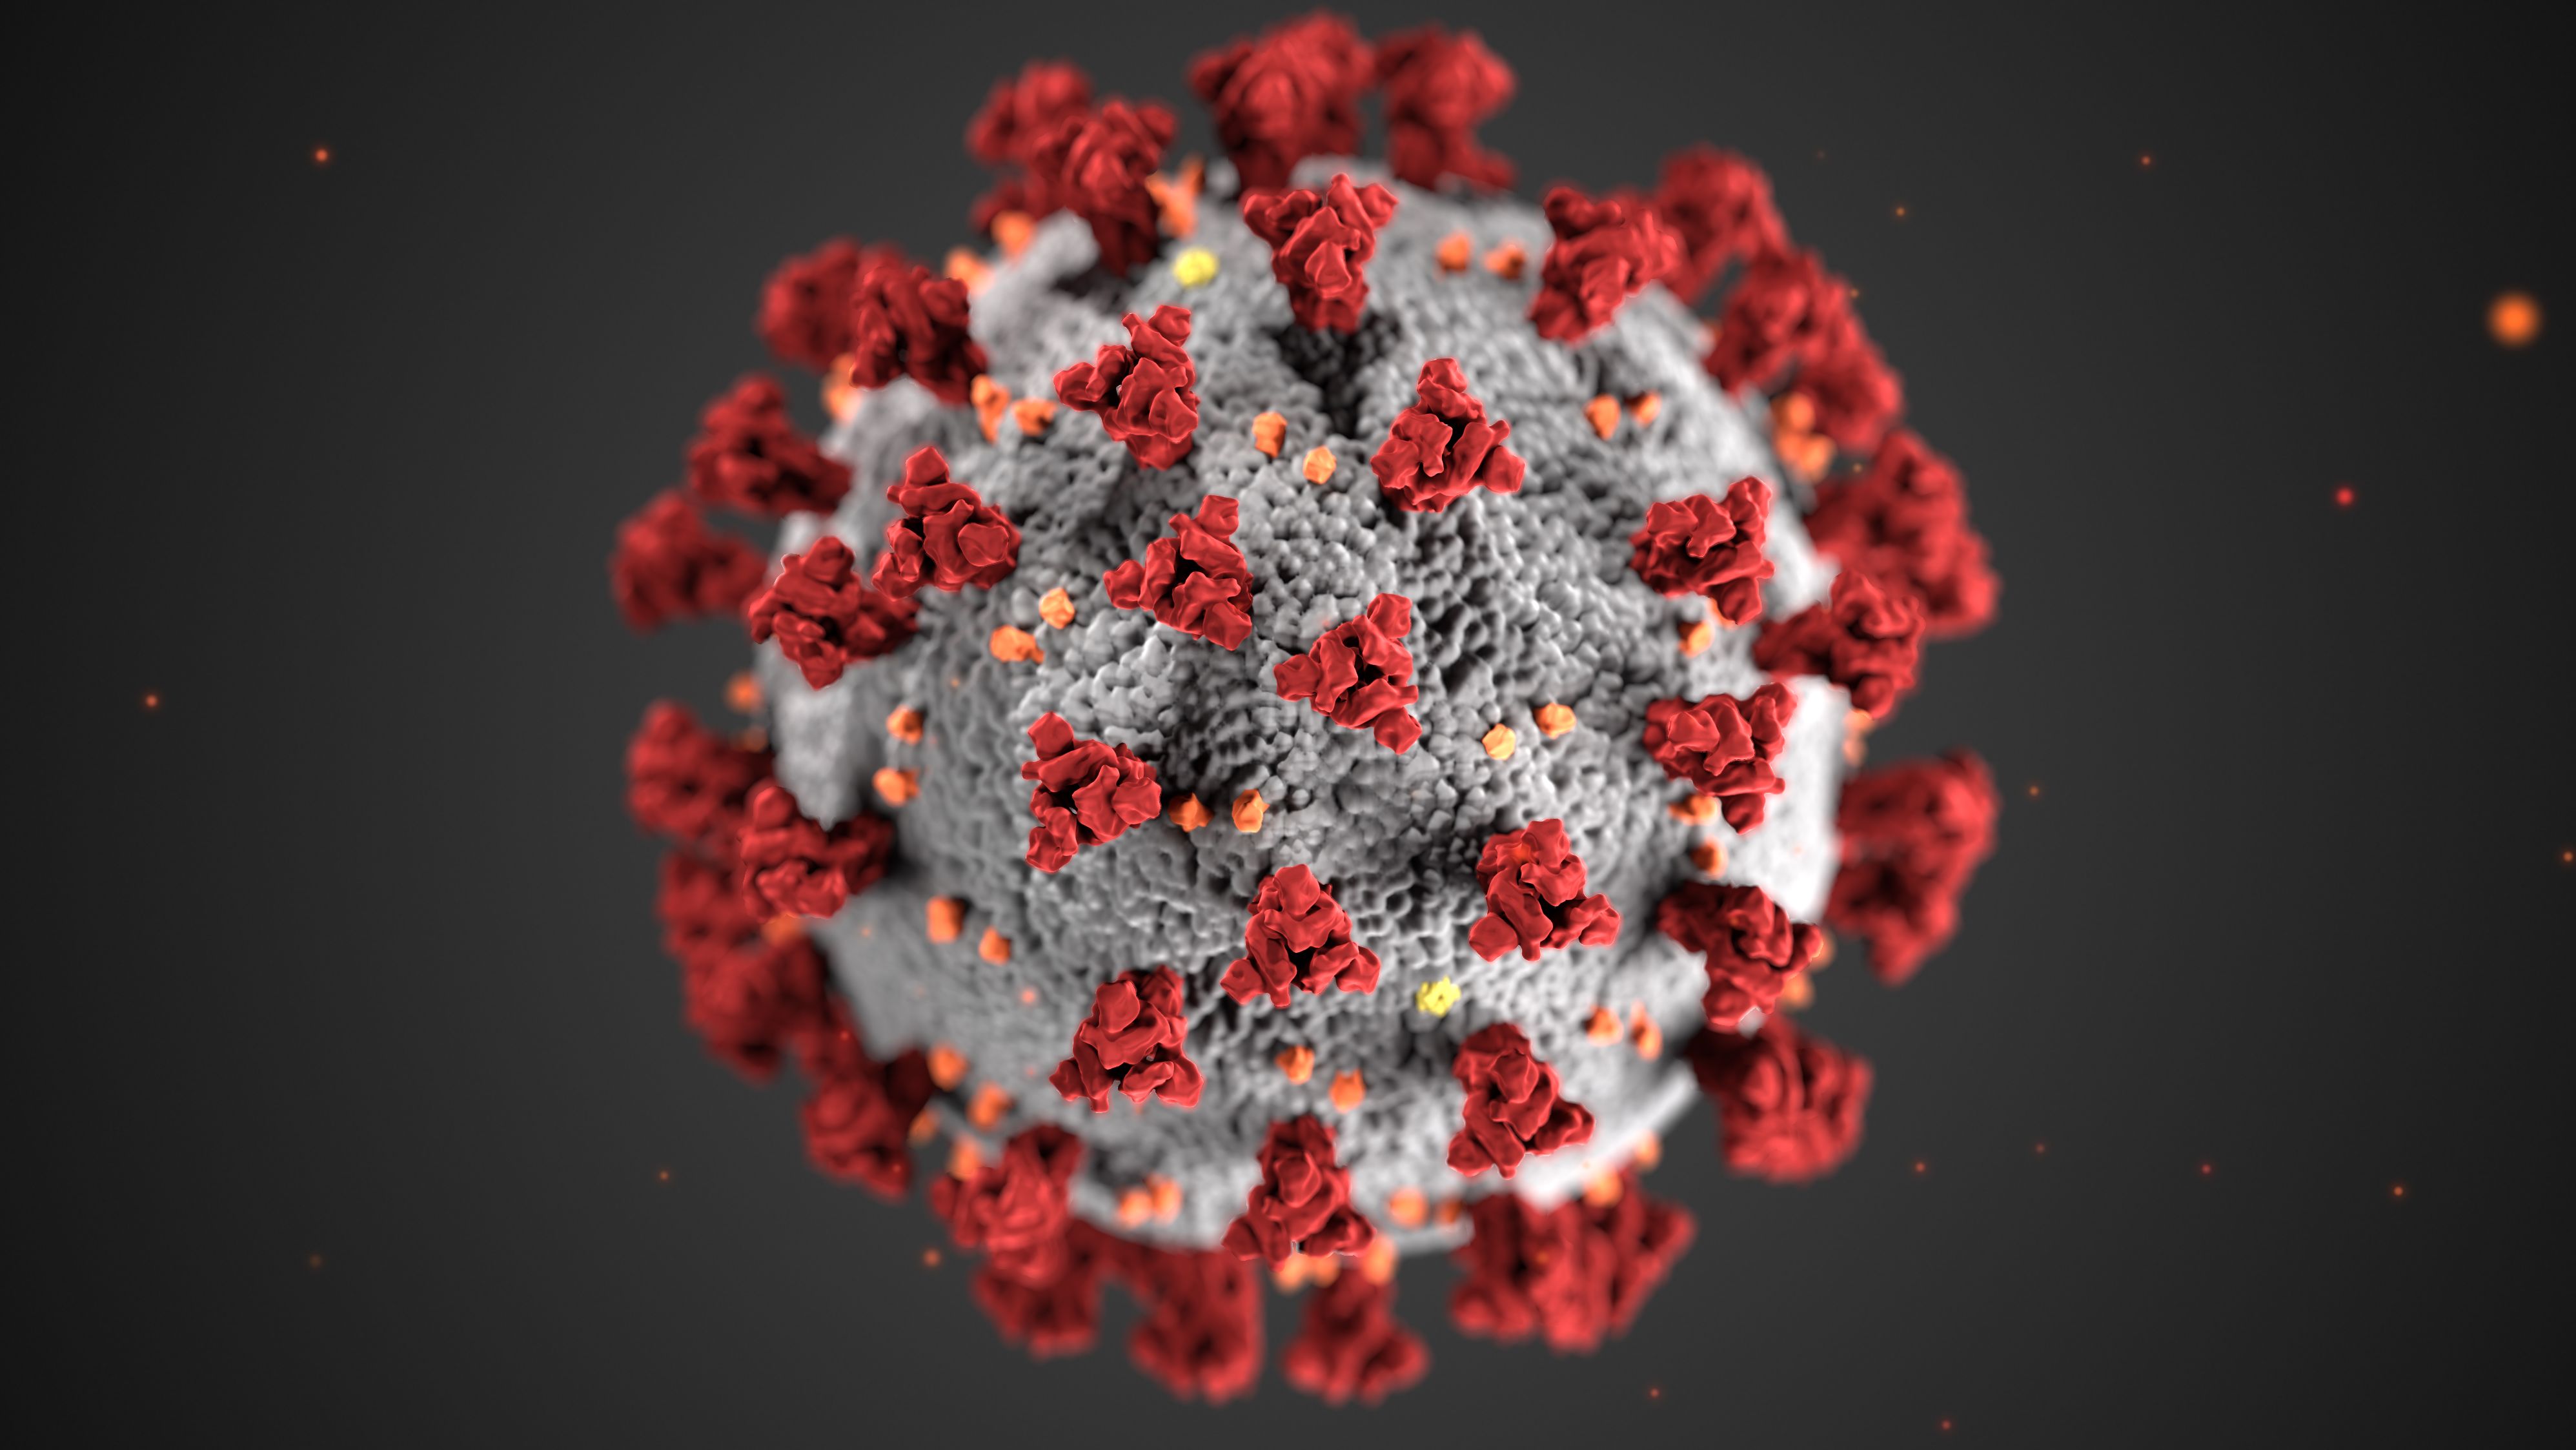 The CDC's illustration of the novel coronavirus that causes Covid-19. The red spikes represent the proteins that allow the virus to attach itself to human cells.